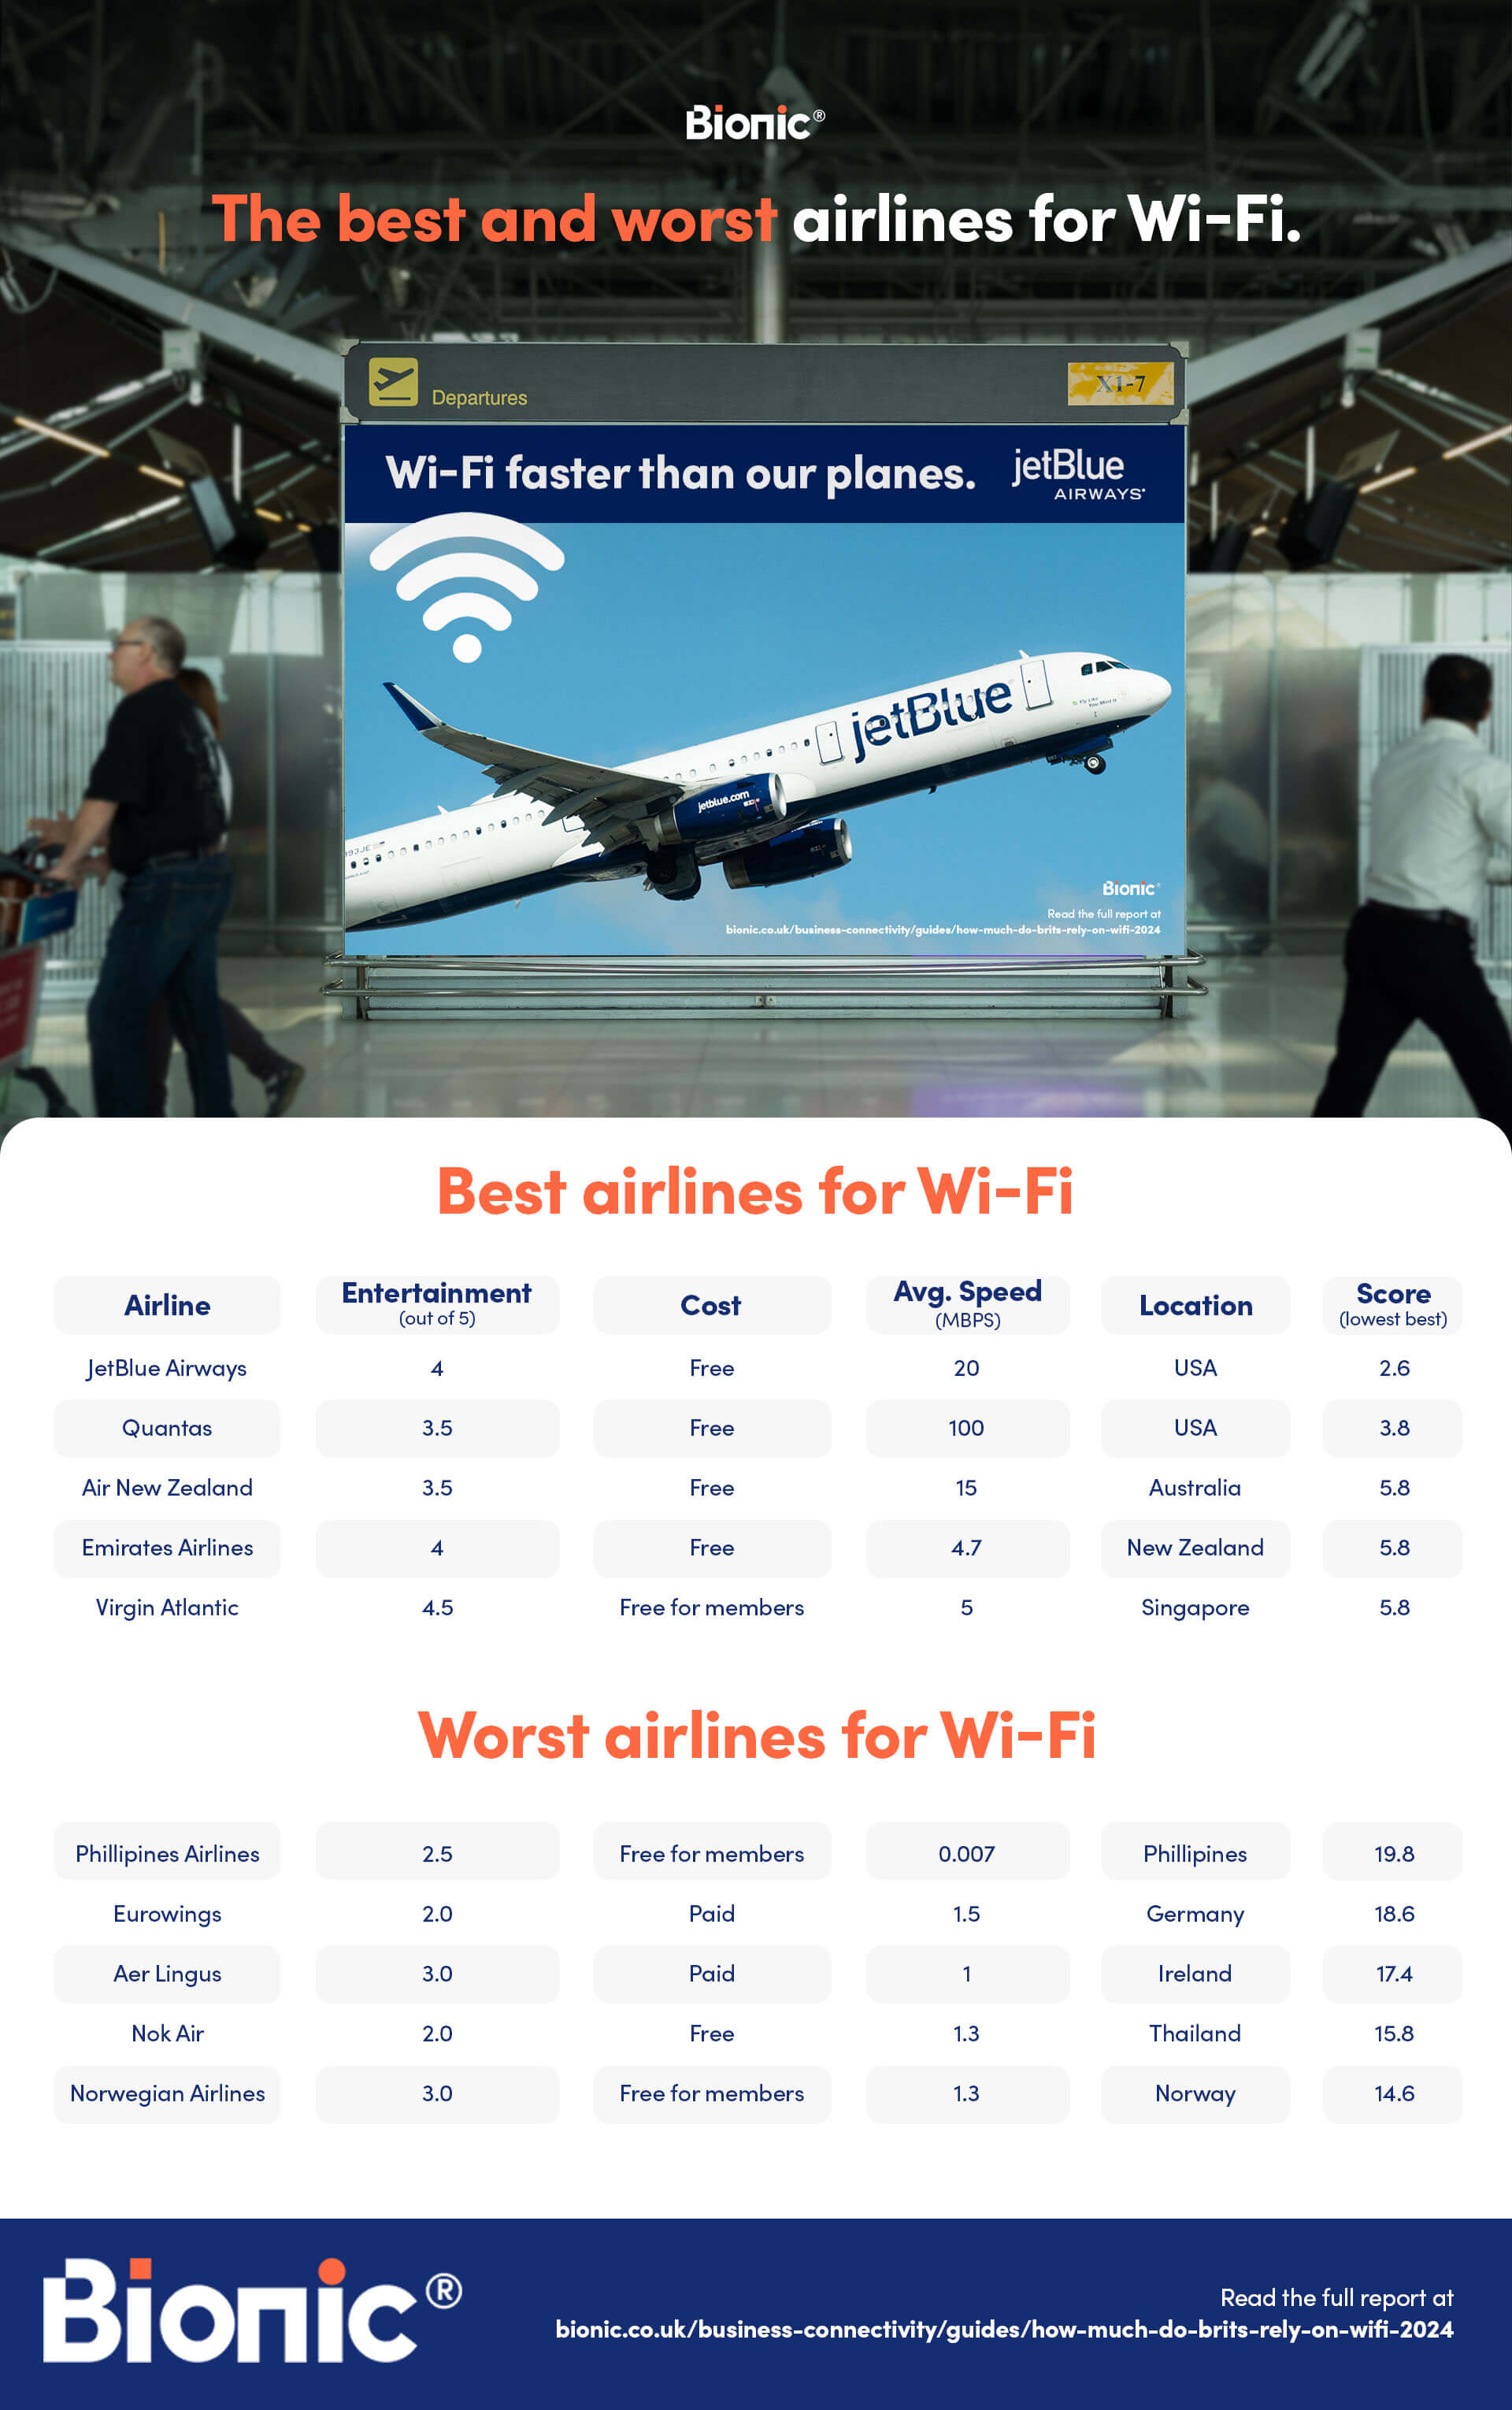 Infographic stating the best and worst airlines for Wi-Fi